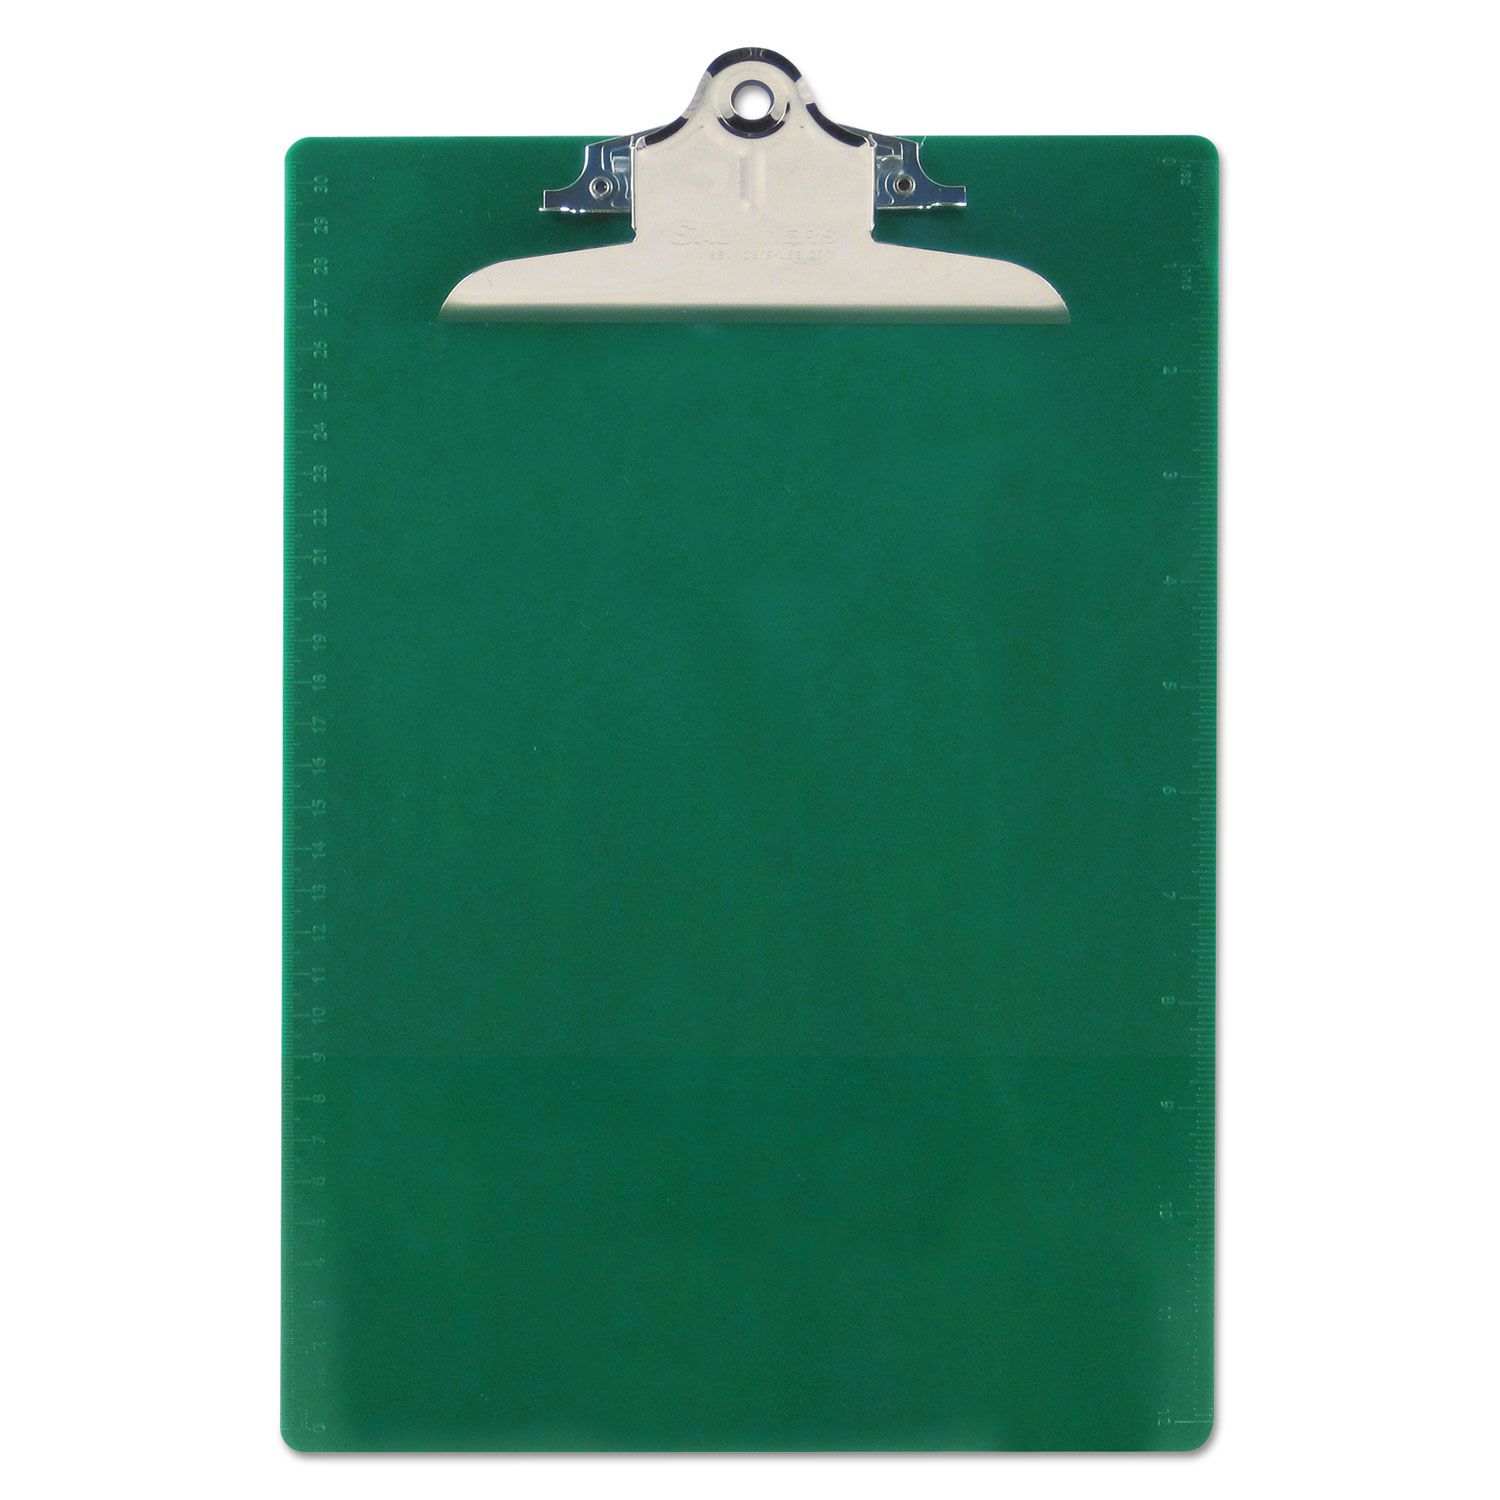  Saunders 21604 Recycled Plastic Clipboard with Ruler Edge, 1 Clip Cap, 8 1/2 x 12 Sheet, Green (SAU21604) 